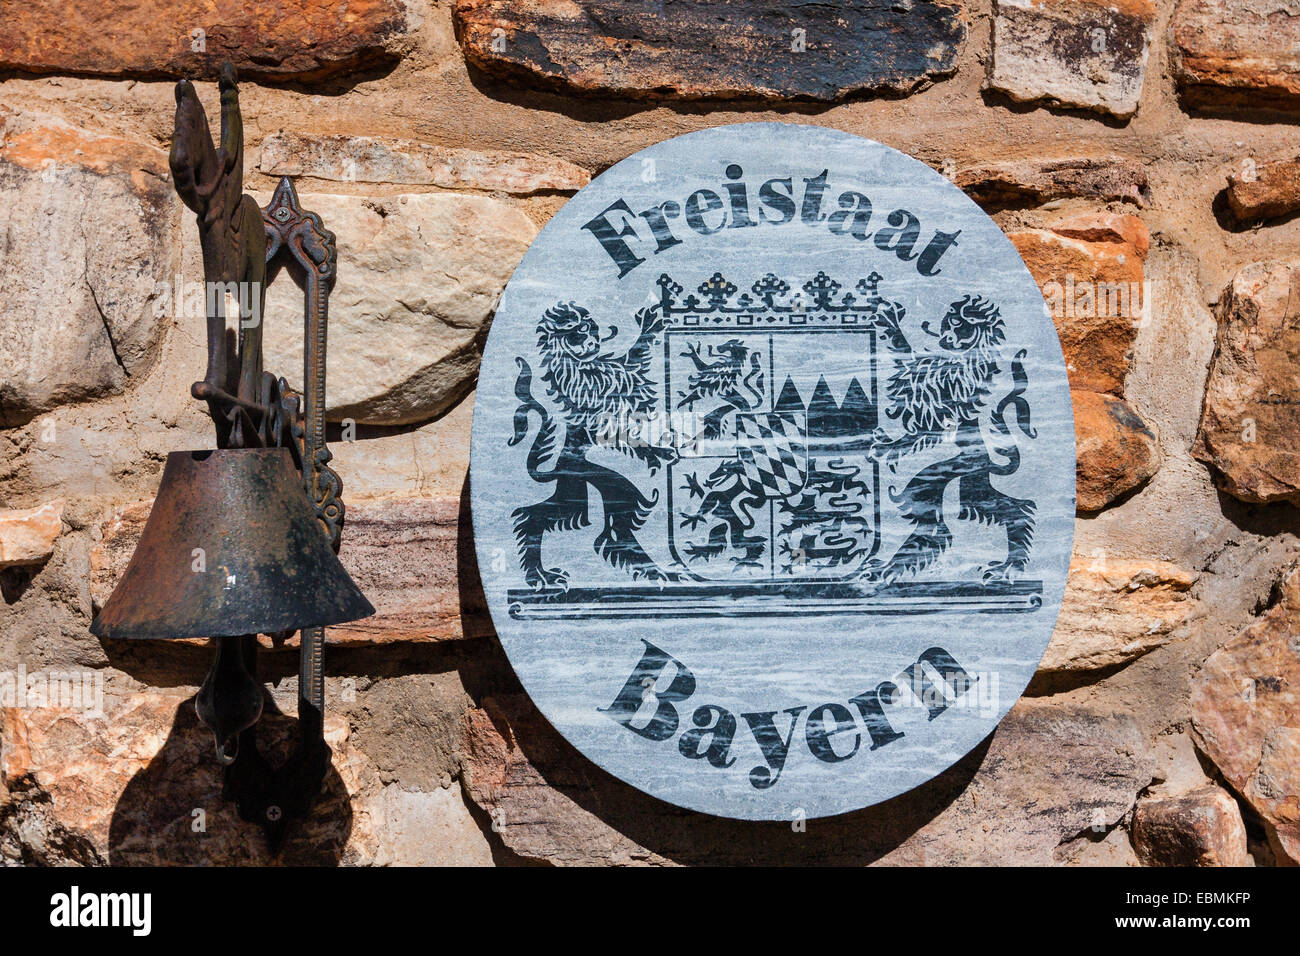 Sign 'Freistaat Bayern', English for 'Free State of Bavaria' with a bell on a natural stone wall, Namibia Stock Photo